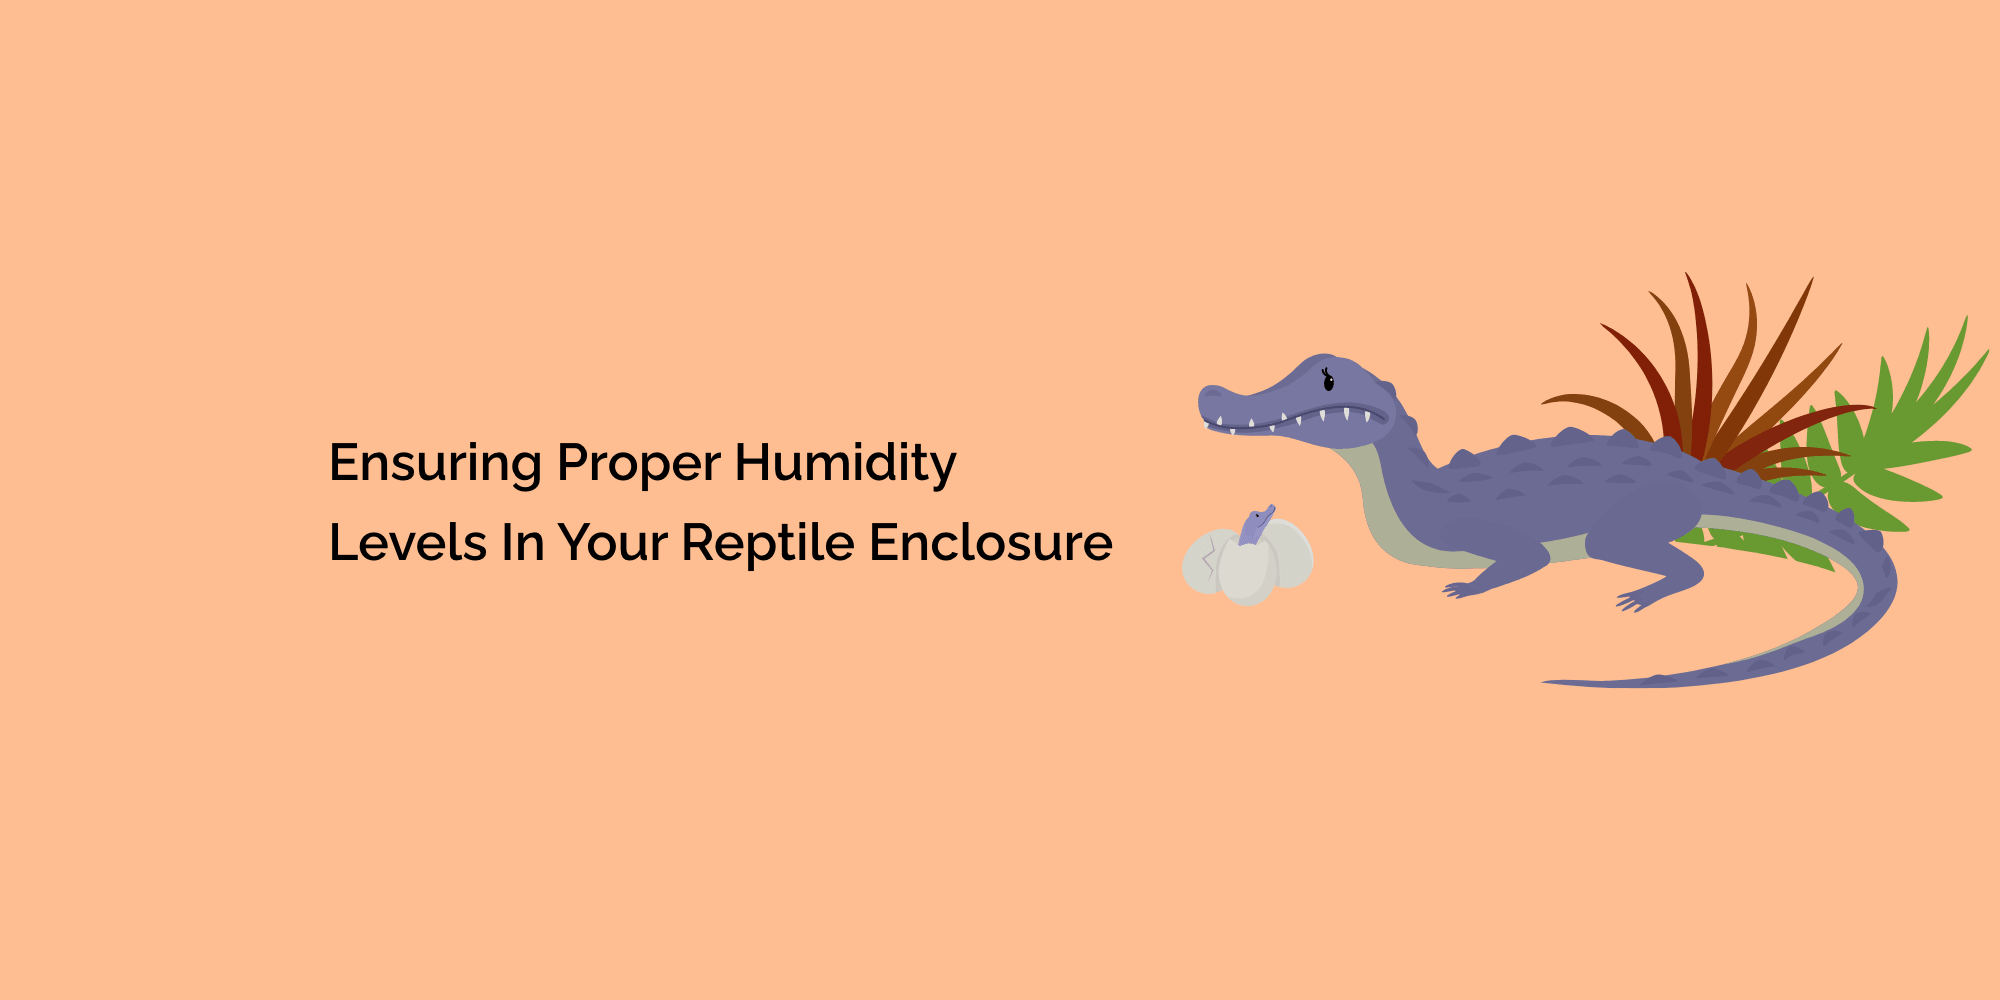 Ensuring Proper Humidity Levels in Your Reptile Enclosure